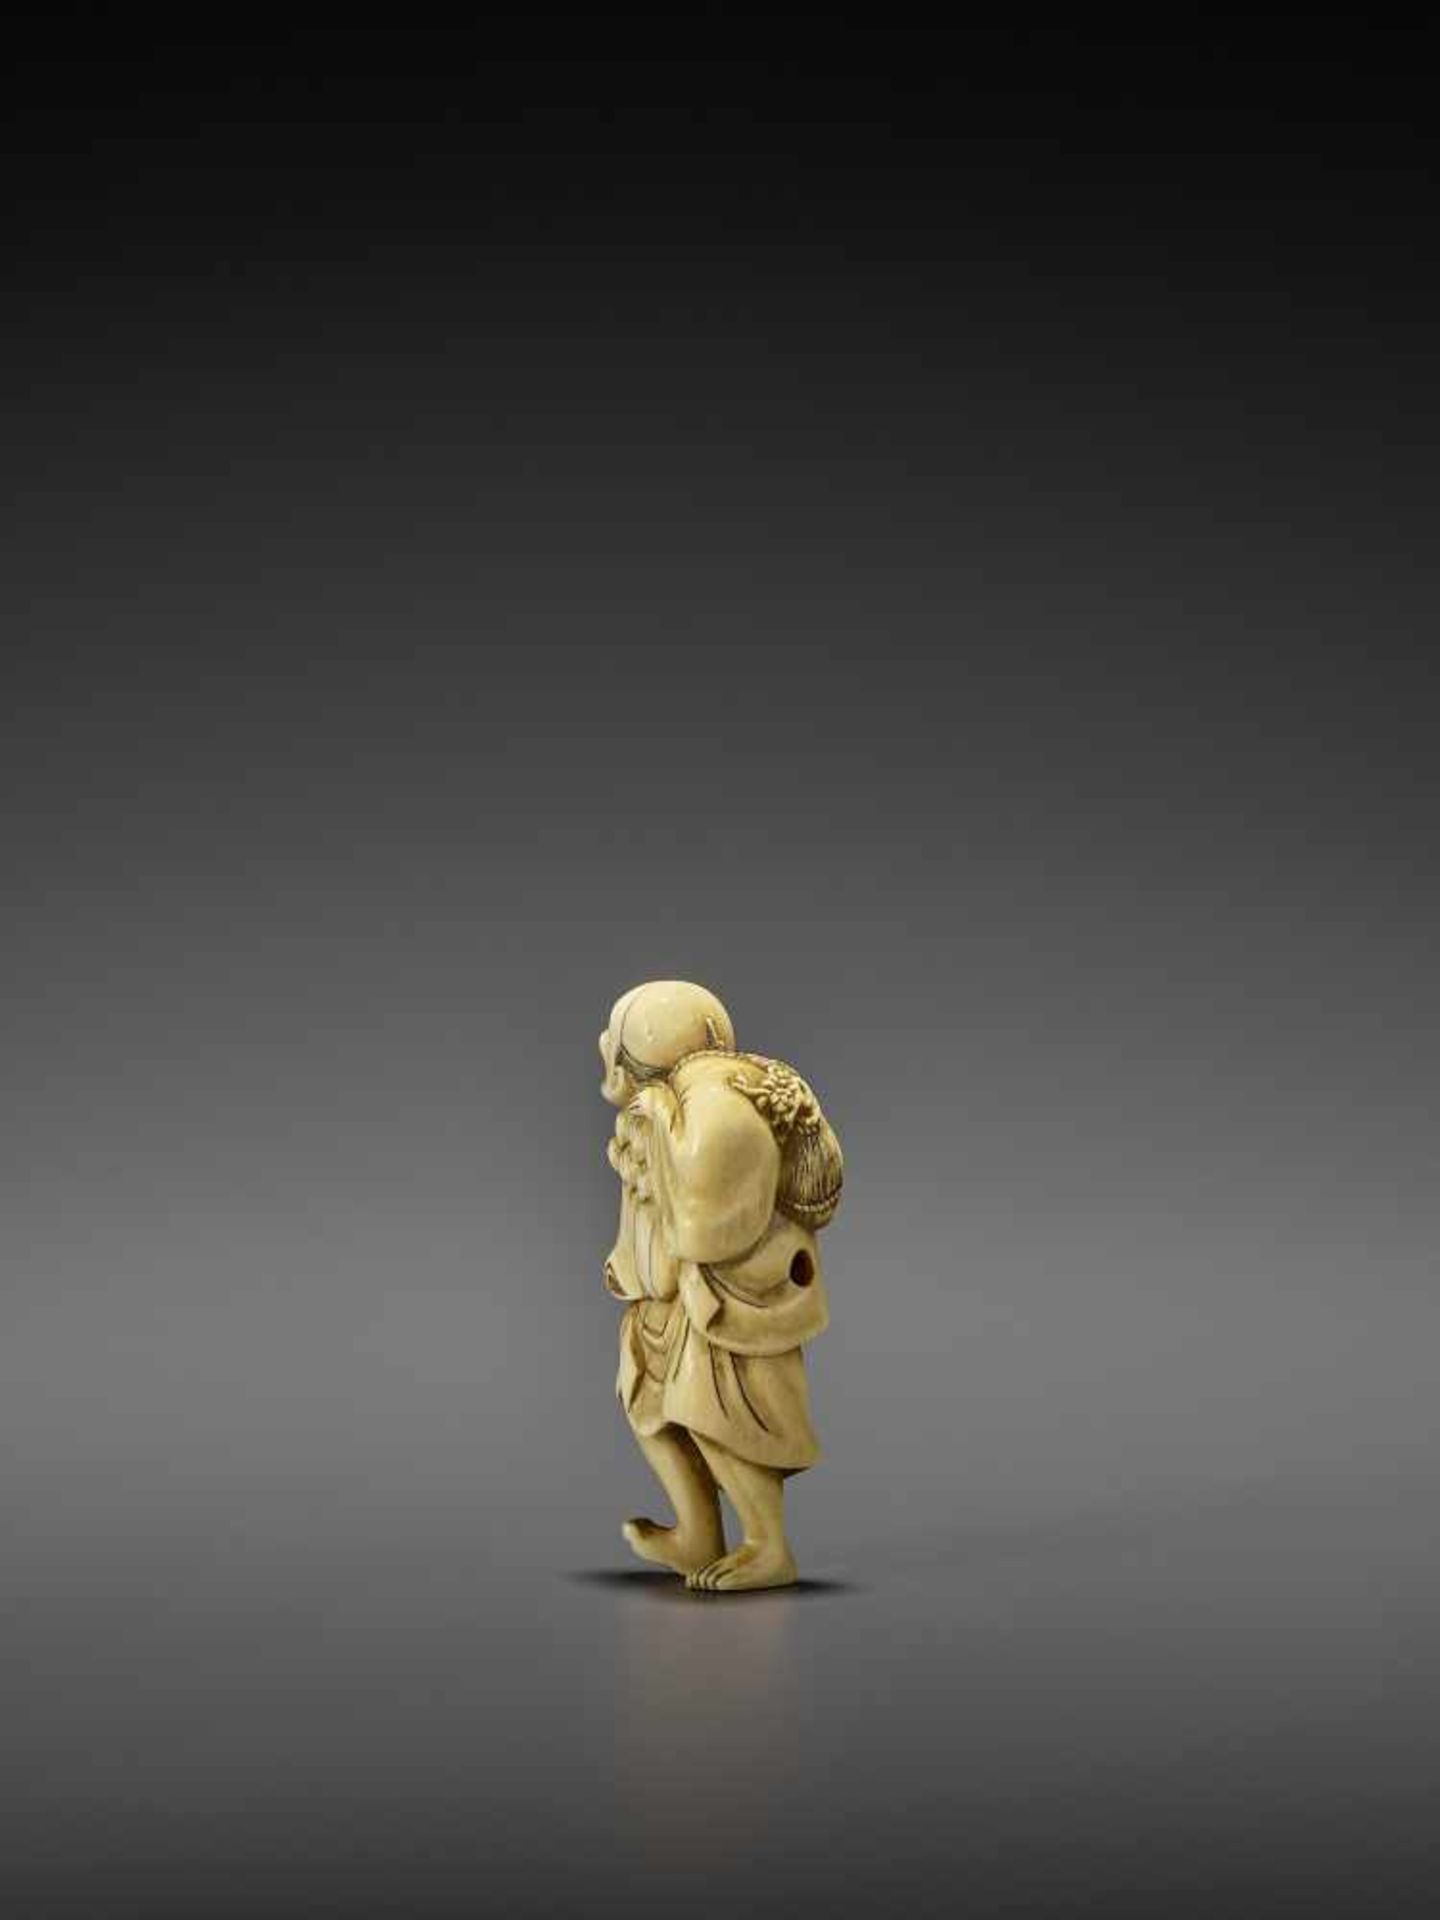 AN IVORY NETSUKE OF A PERSIMMON MERCHANT UnsignedJapan, early 19th century, Edo period (1615-1868) - Image 4 of 10